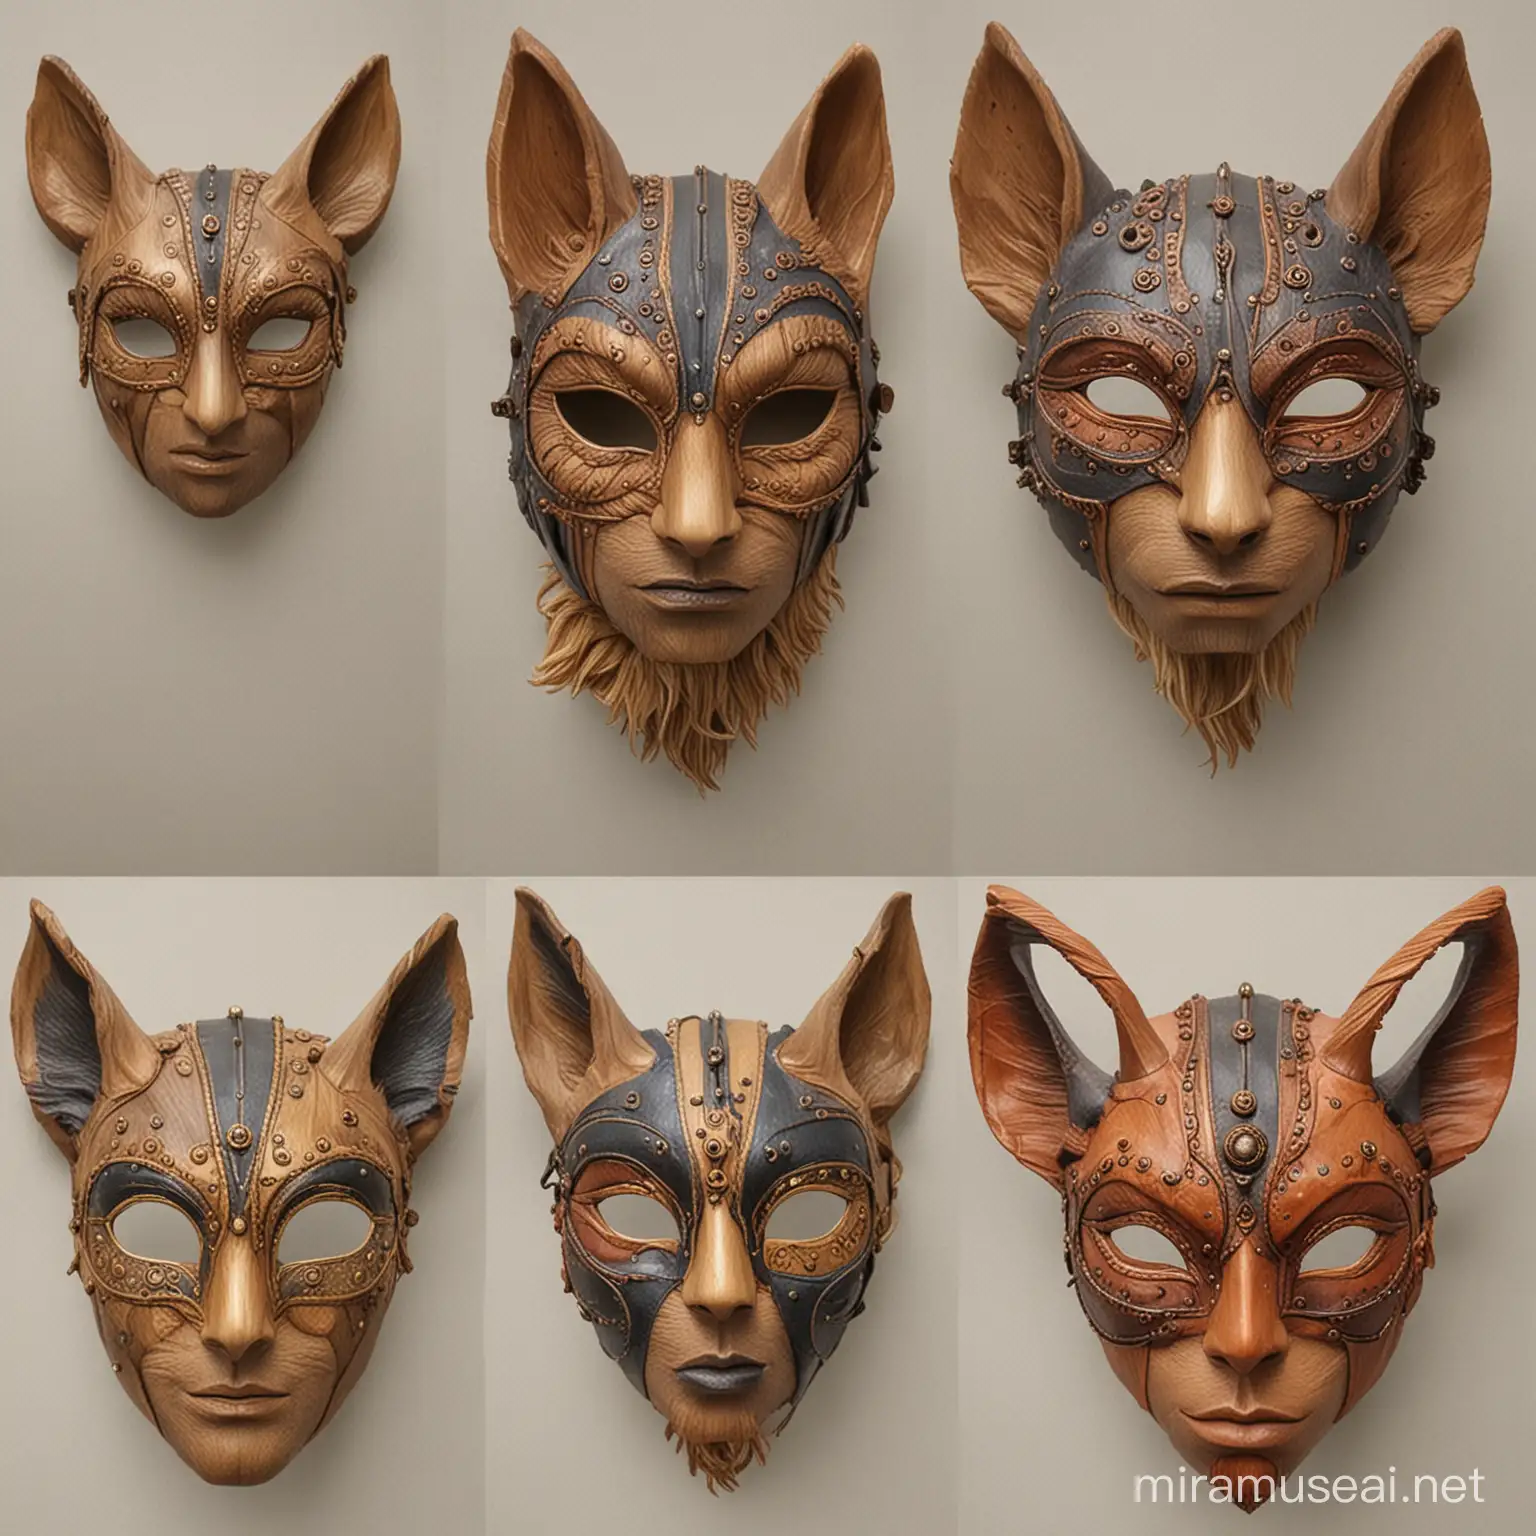 Certainly! Here are the steps to create a multi-material animal mask using wood, metal, and resin:

1. **Planning and Design:** Start by sketching out a plan for the mask, including choosing the animal you want to represent and selecting the materials and techniques you'll use.

2. **Material Selection:** Look for different types of wood, metal, and resin that you want to use. You can use wood for the basic shape of the mask, metal for adding three-dimensional details like the nose, eyes, and ears, and resin for filling in gaps and adding special effects like vibrant colors or air bubbles.

3. **Modeling:** Model the mask template using wood, and use the metal to add three-dimensional details like the nose, eyes, and ears.

4. **Shaping:** Use the resin to fill in the gaps in the design and add desired effects such as vibrant colors or air bubbles.

5. **Finishing:** Once the resin is dry, finish the mask by sanding and polishing to remove any imperfections and make the surface smooth and shiny.

6. **Adding Final Details:** Add any final details or touches you desire, such as attaching leather straps for securing the mask to the face or adding metal rivets for added effect.

Enjoy the creative process and experimentation while creating the mask, and remember that updates and modifications are a natural part of the creative process.